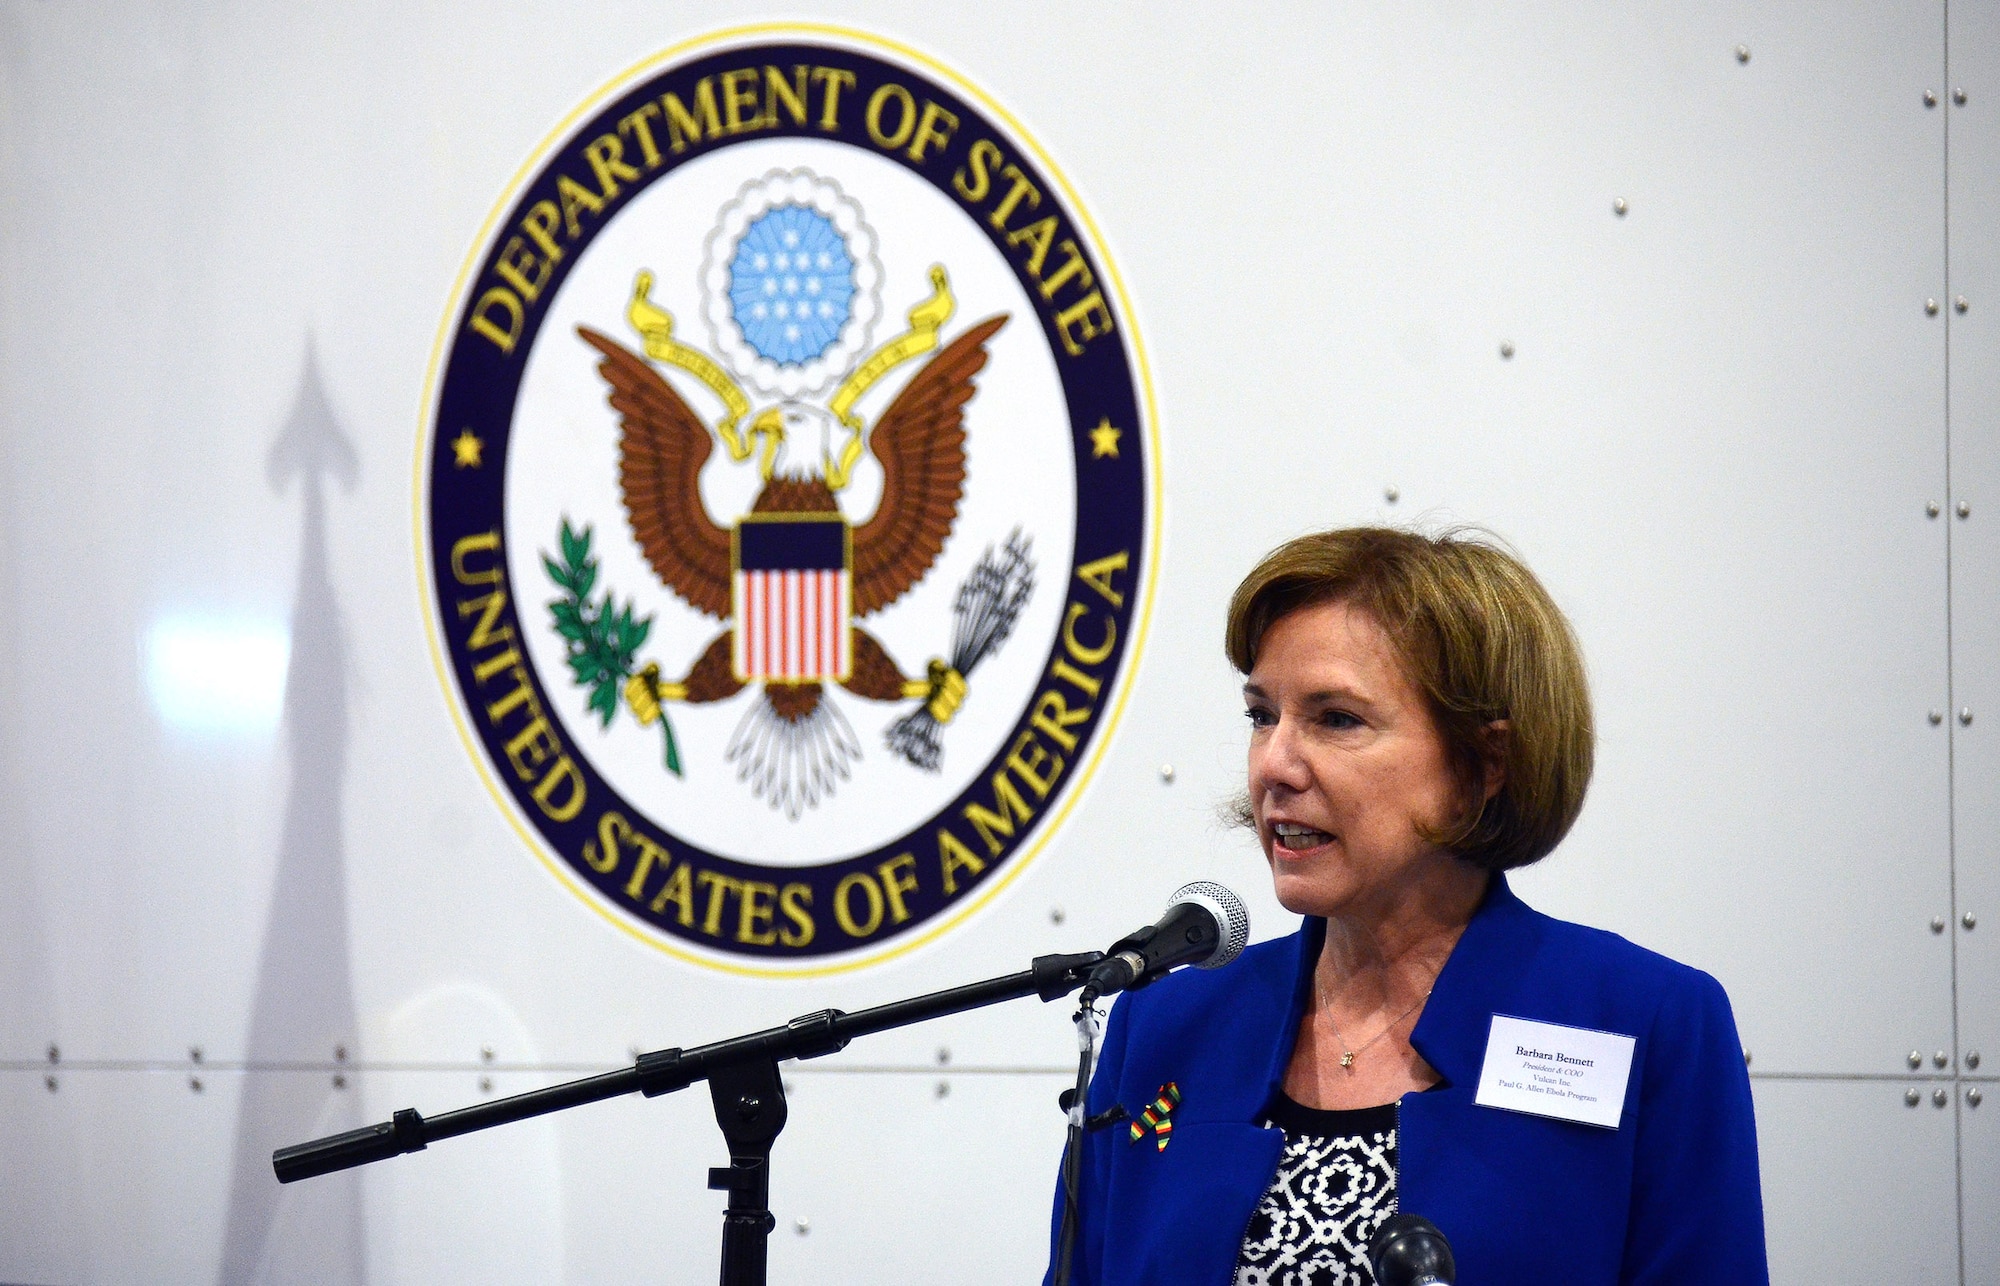 Barbara Bennett, president and chief operating officer Paul G. Allen Ebola Program, gives remarks at the unveiling of the US State Department-sponsored Containerized Biocontainment Systems units at Dobbins Air Reserve Base, Ga., Aug. 11, 2015. The two Containerized Biocontainment units were built by MRIGlobal through a partnership with the U.S. State Dept. and the Paul G. Allen Ebola Program, and will be positioned at Dobbins ARB, ready for future. (U.S. Air Force photo/ Brad Fallin)